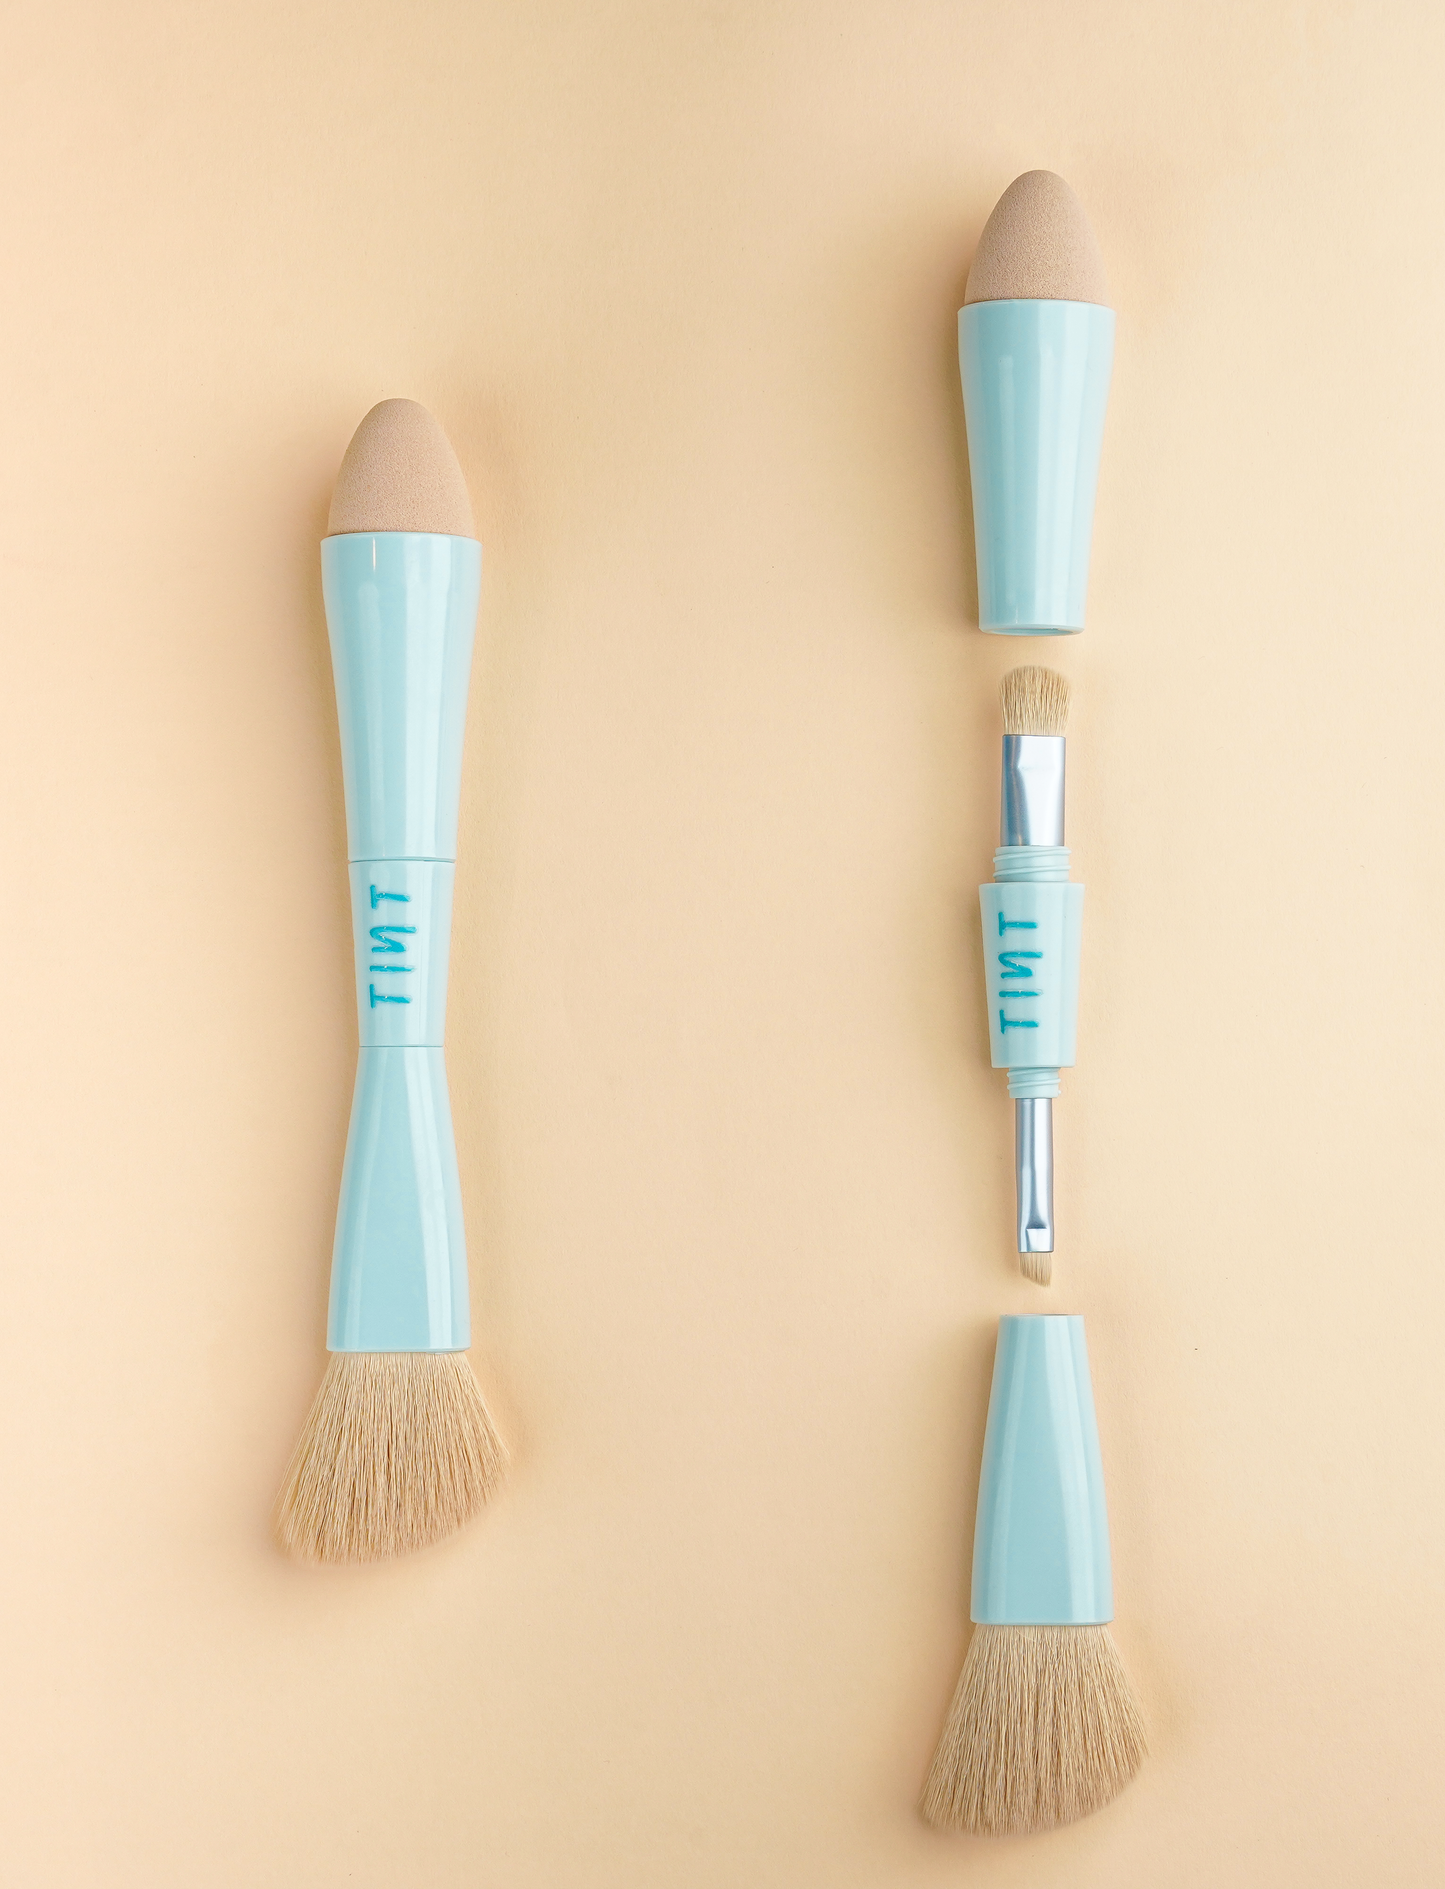 4Play 4 in 1 Make Up Brush